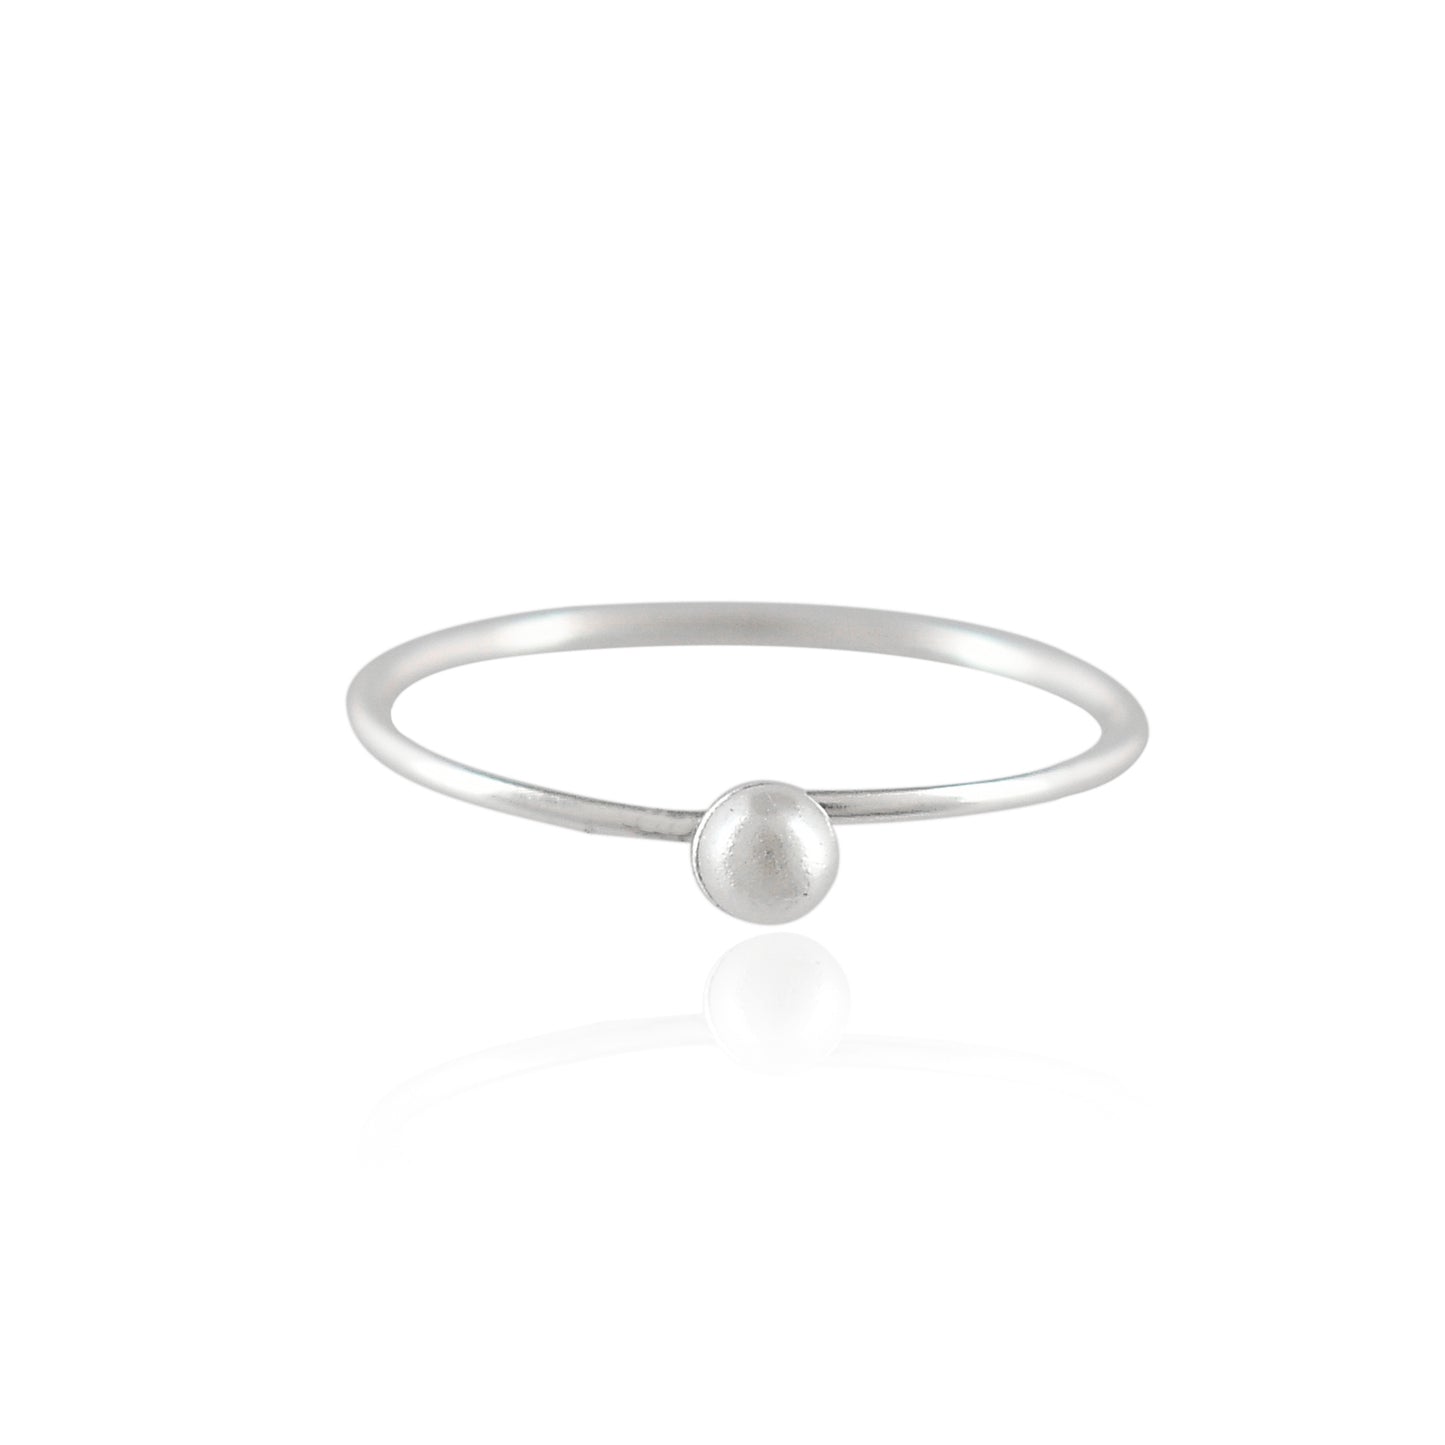 Women's Handmade Sterling Silver 925 Pearl Nose Ring - 10mm